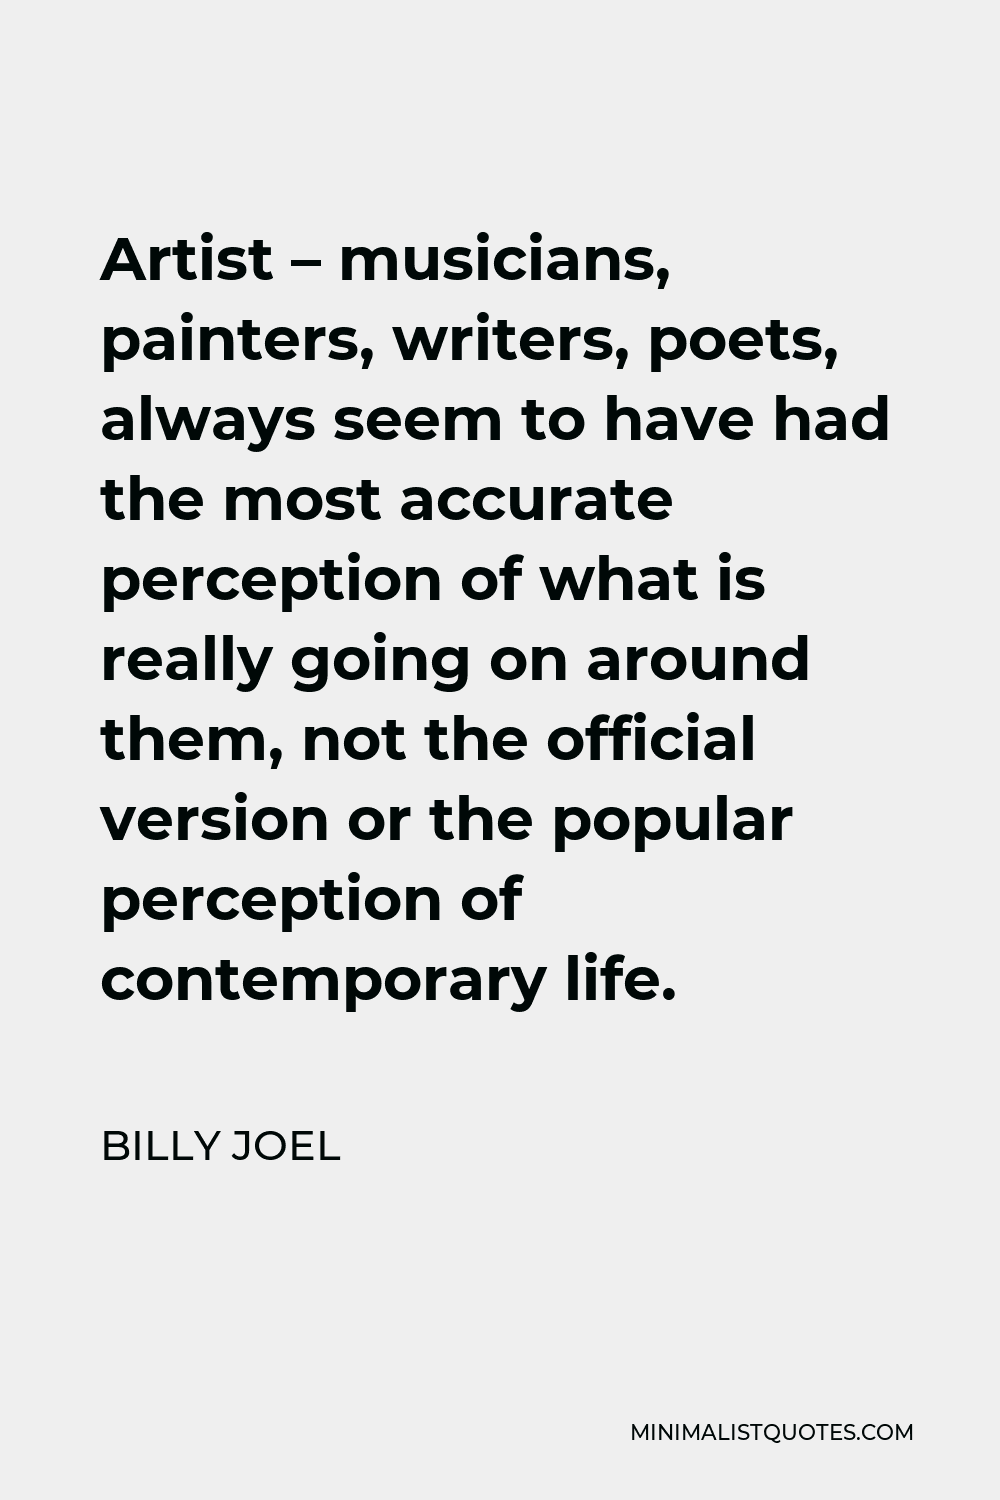 Billy Joel Quote - Artist – musicians, painters, writers, poets, always seem to have had the most accurate perception of what is really going on around them, not the official version or the popular perception of contemporary life.